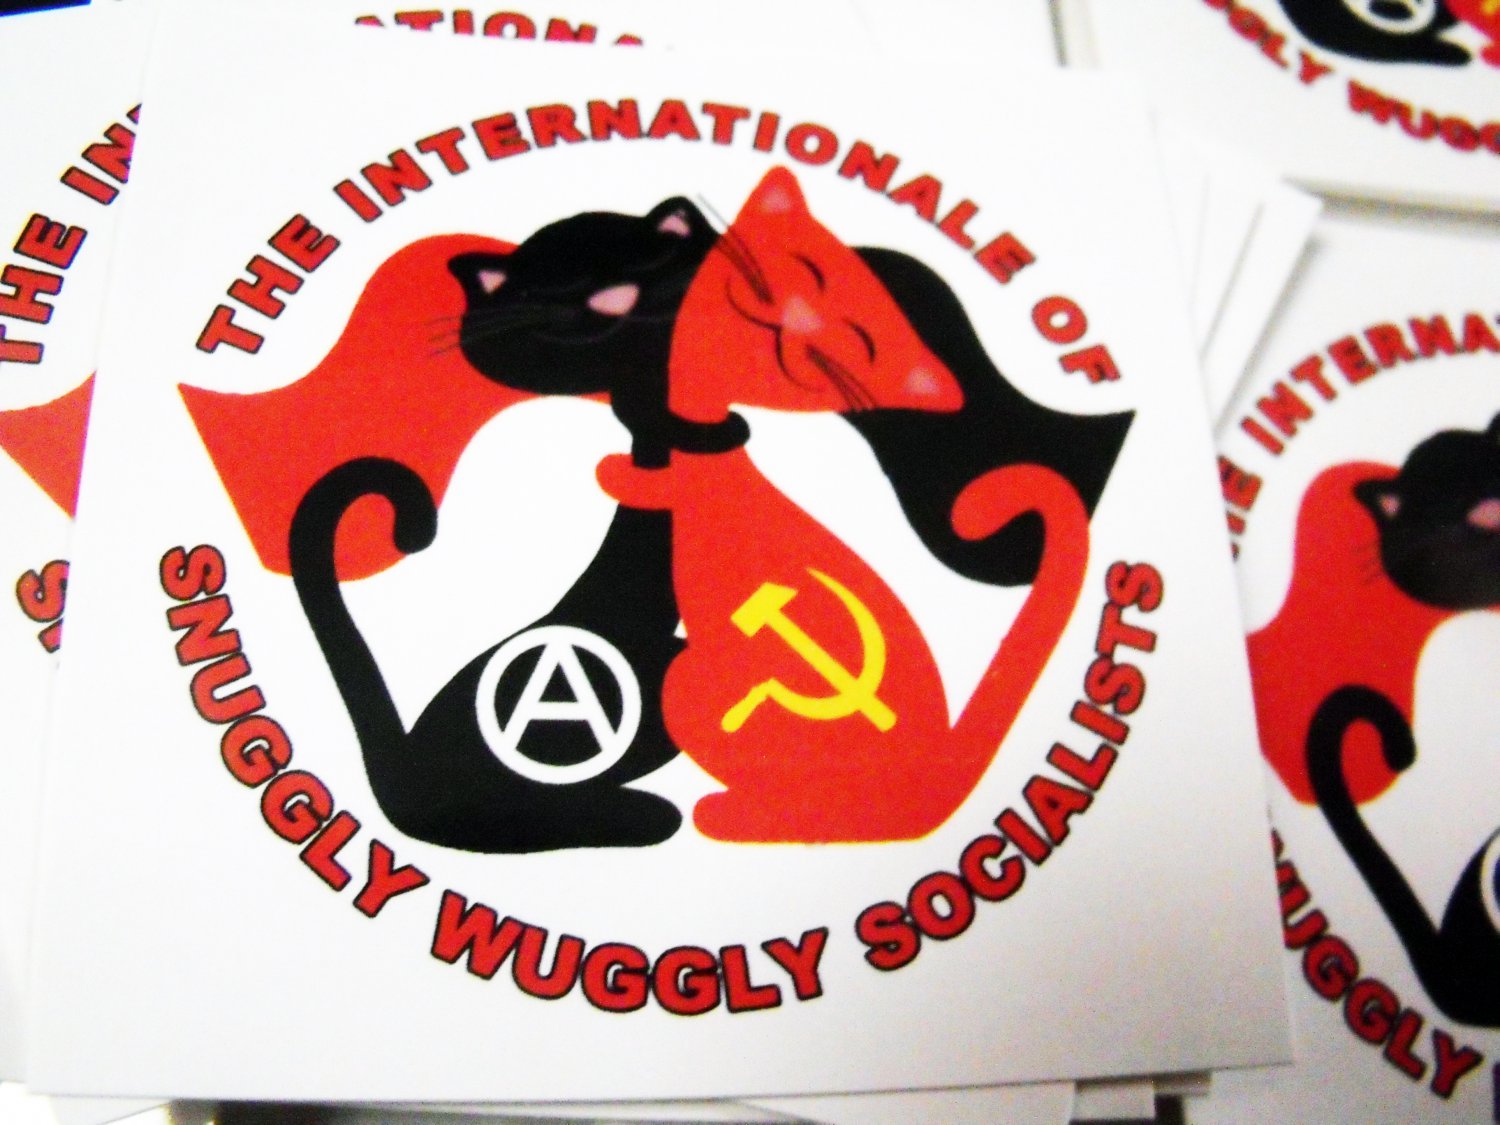 25 THE INTERNATIoNALE oF SNUGGLY WUGGLY SoCIALISTS 2.5" x 2.5" stickers